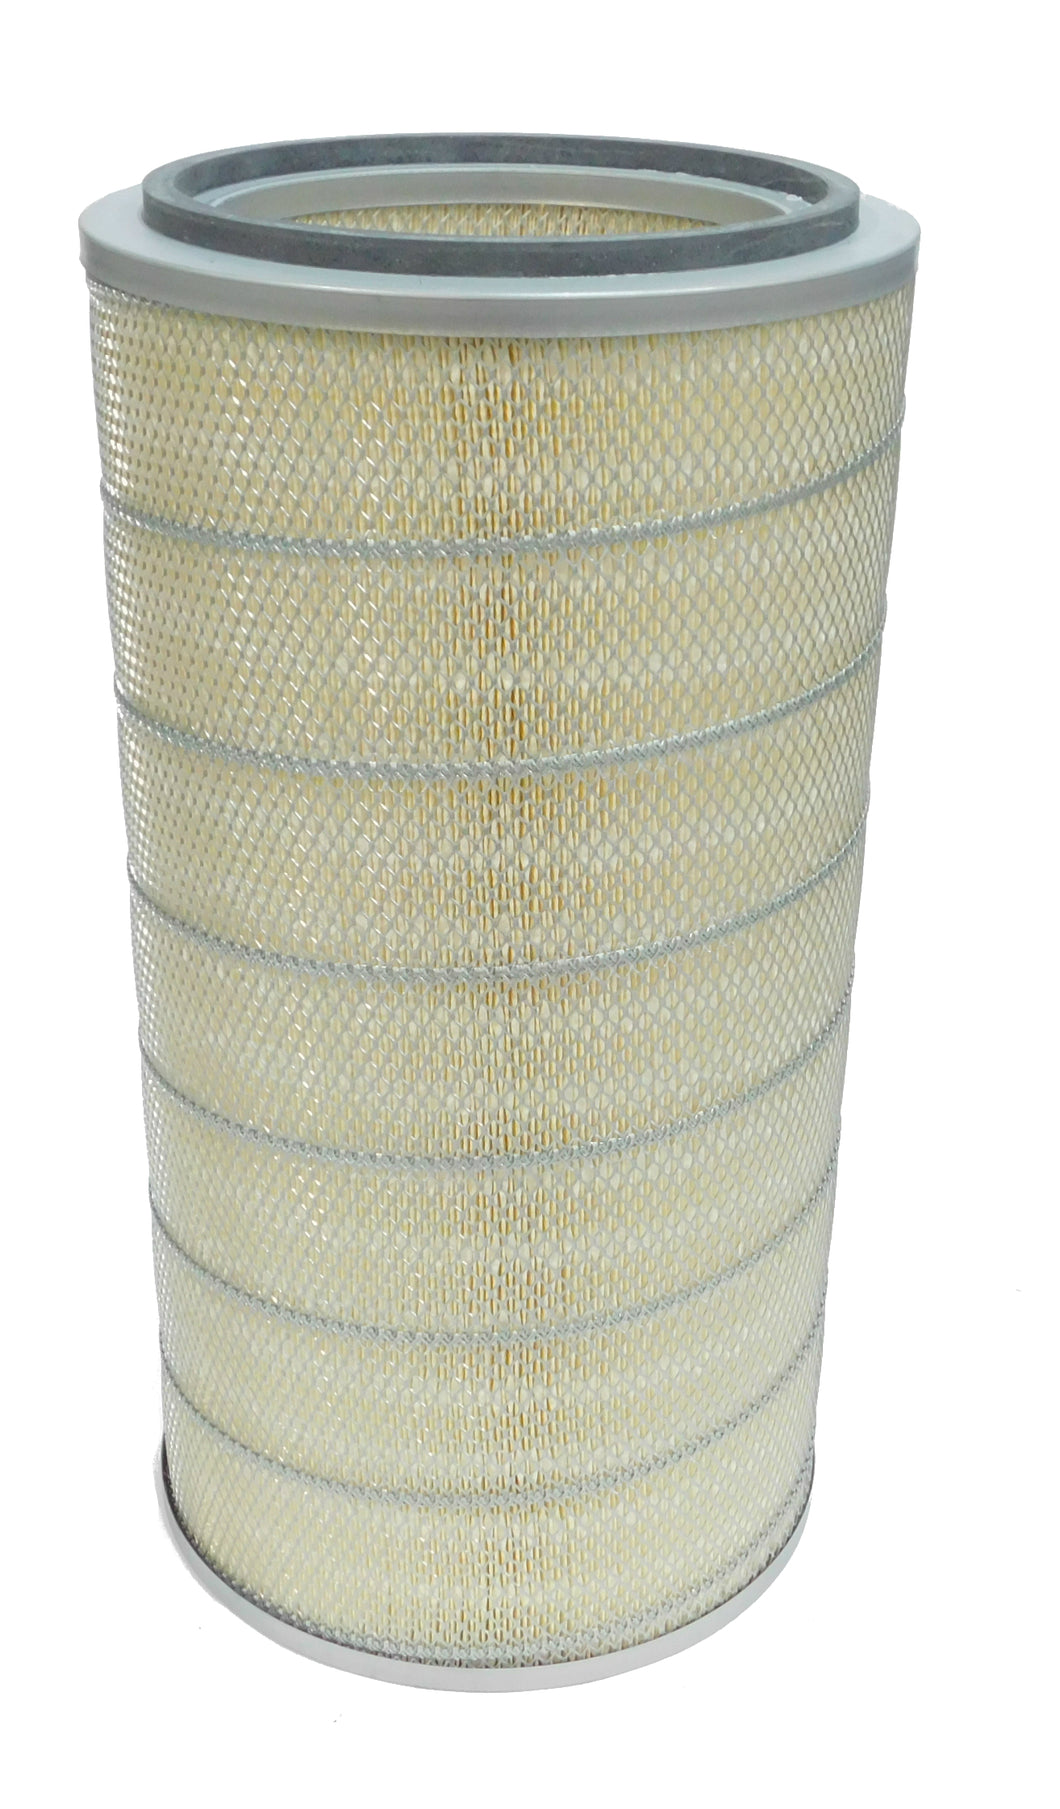 46869 - Wix - OEM Replacement Filter